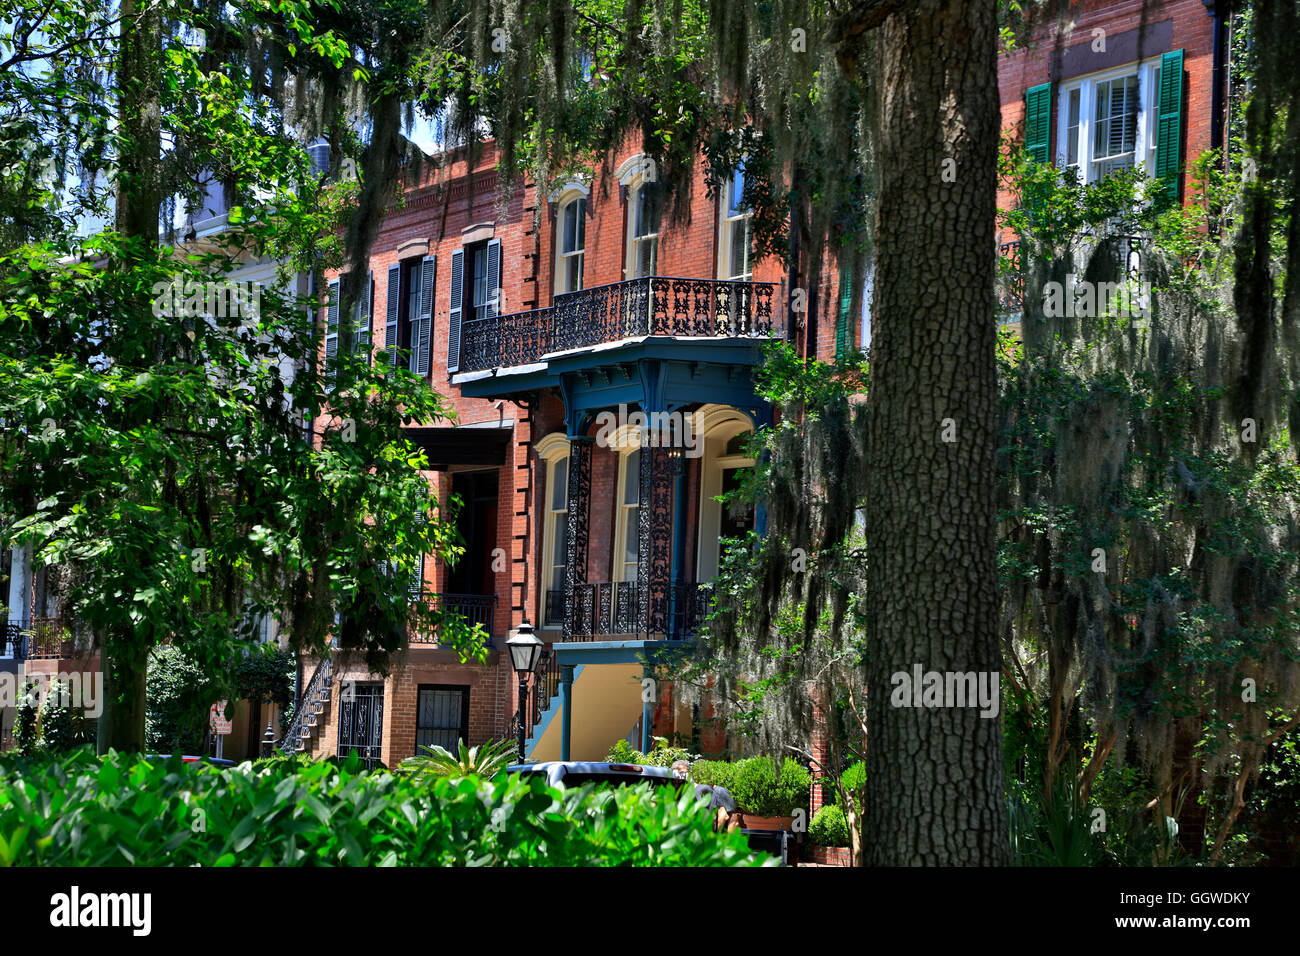 Southern style mansions grace the historical section of SAVANNA GEORGIA Stock Photo